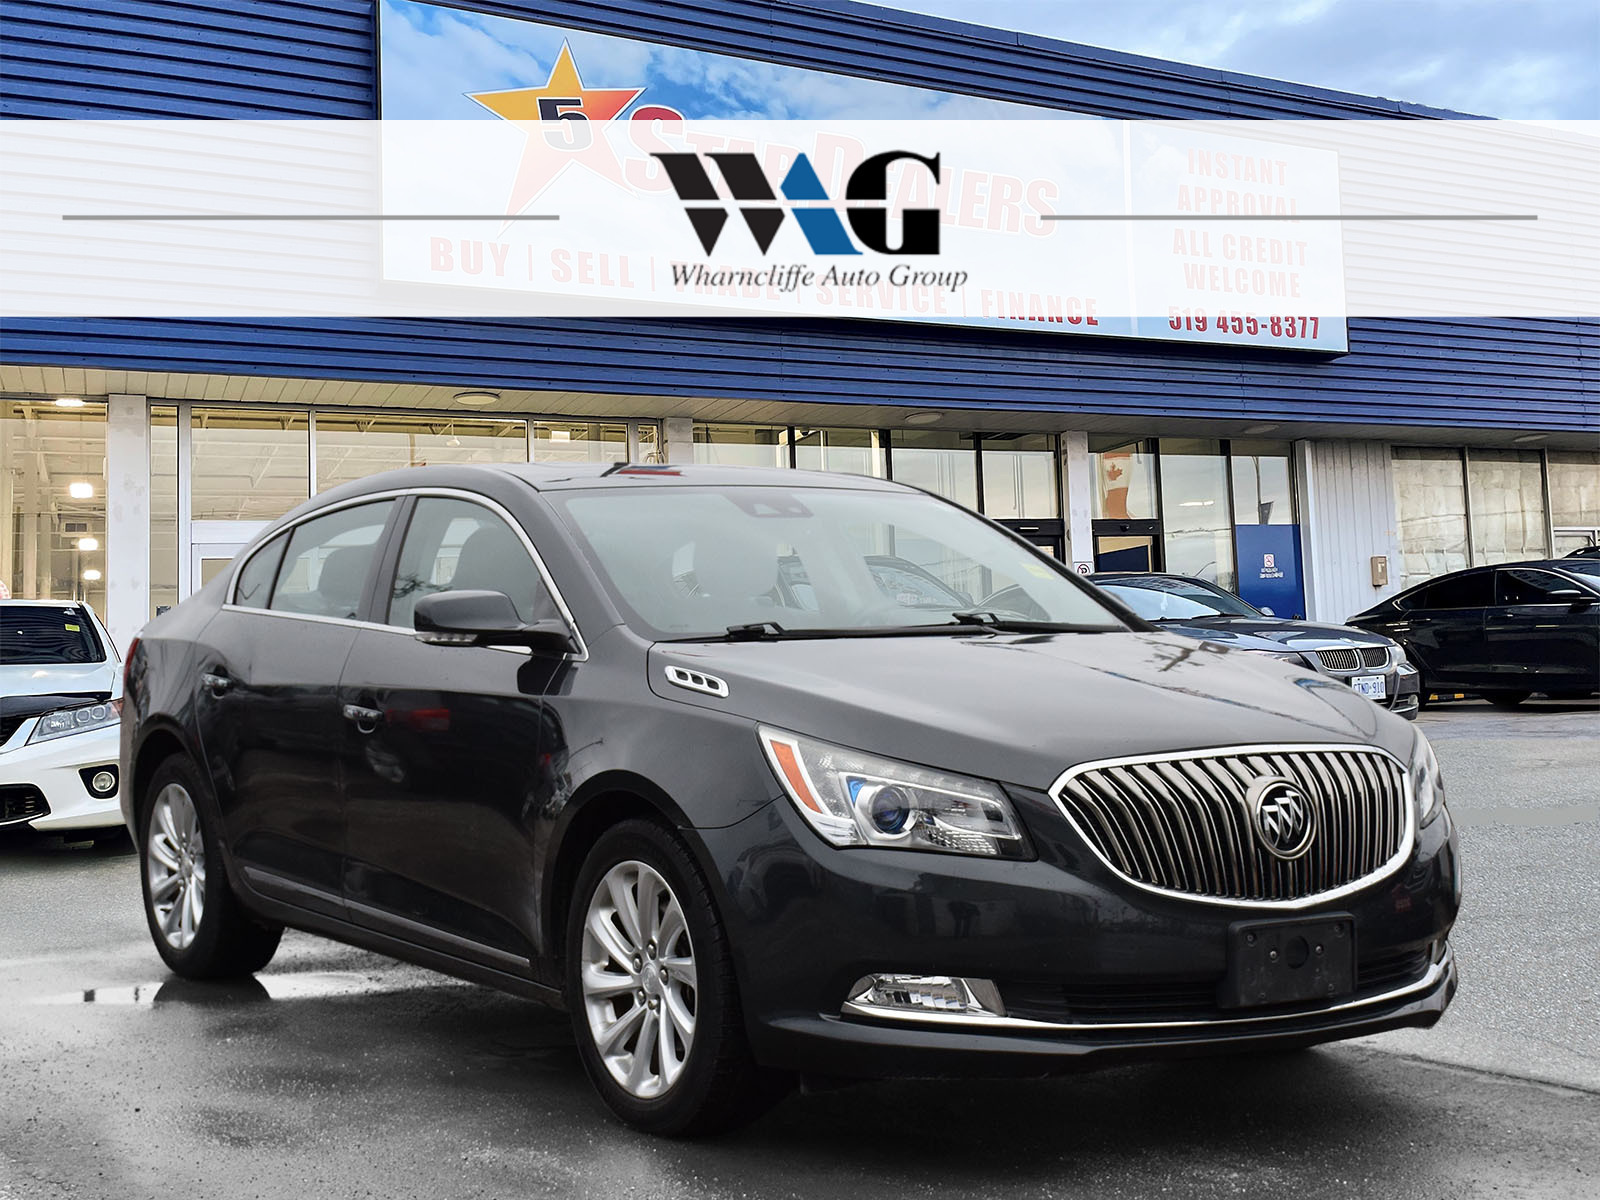 2014 Buick LaCrosse LEATHER NAV SUNROOF P/H-SEATS MINT CONDITION!